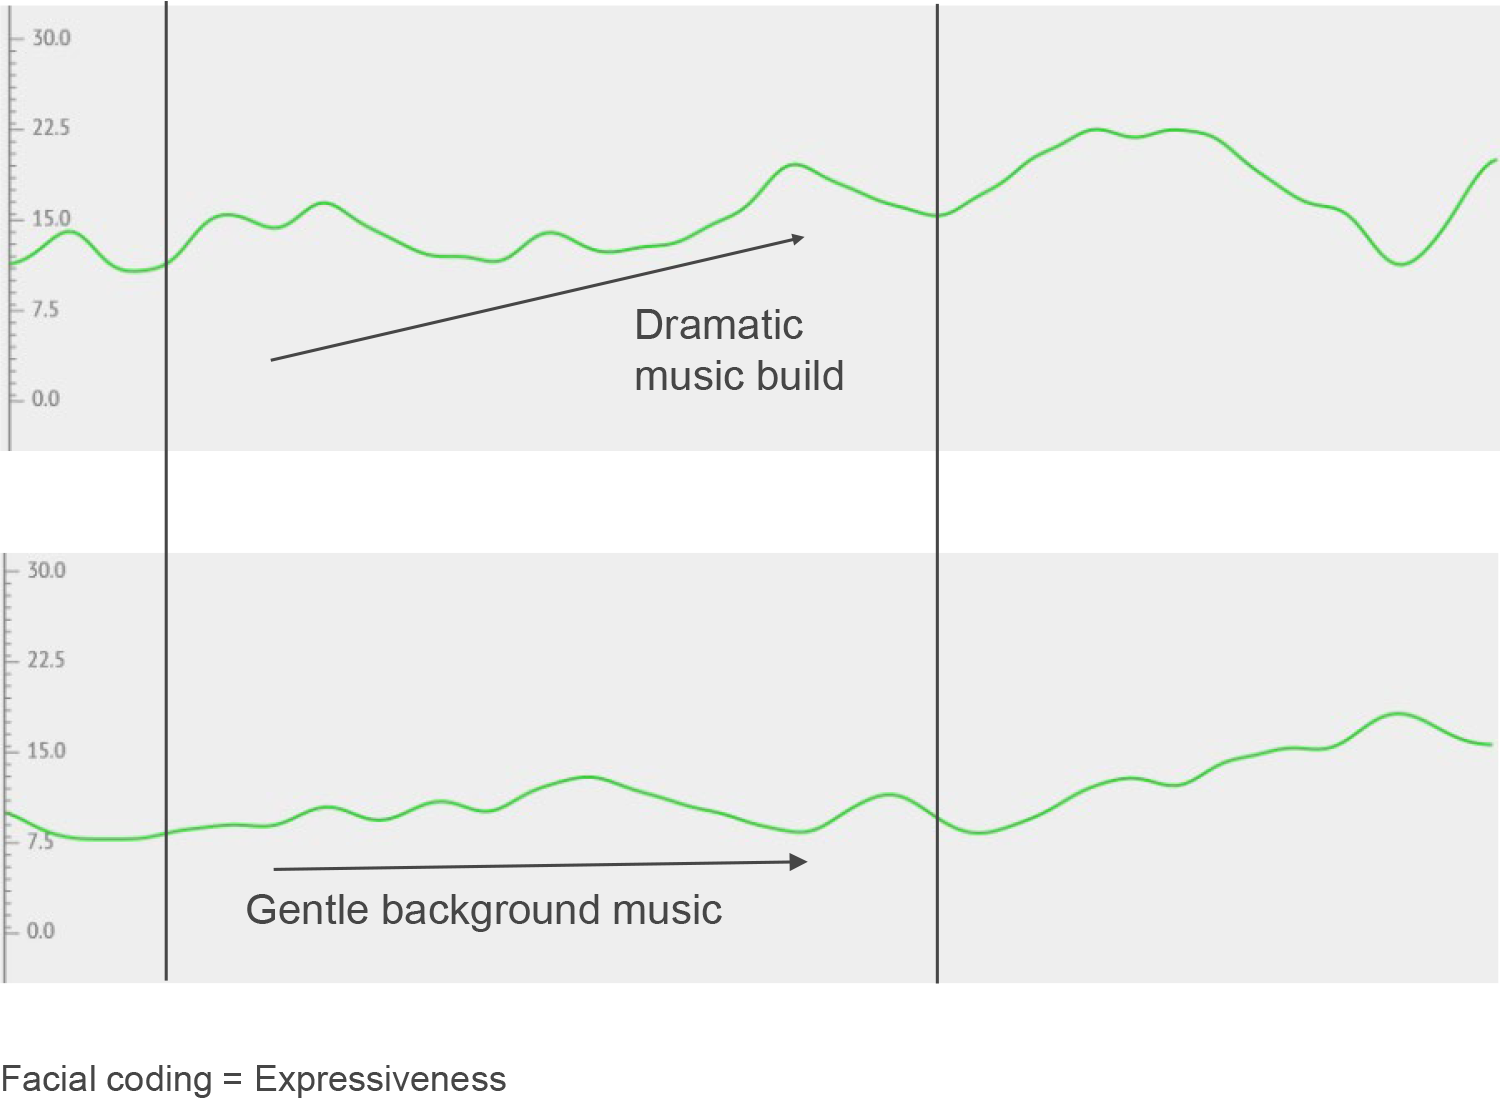 The way music is used can impact the emotional experience of the ad